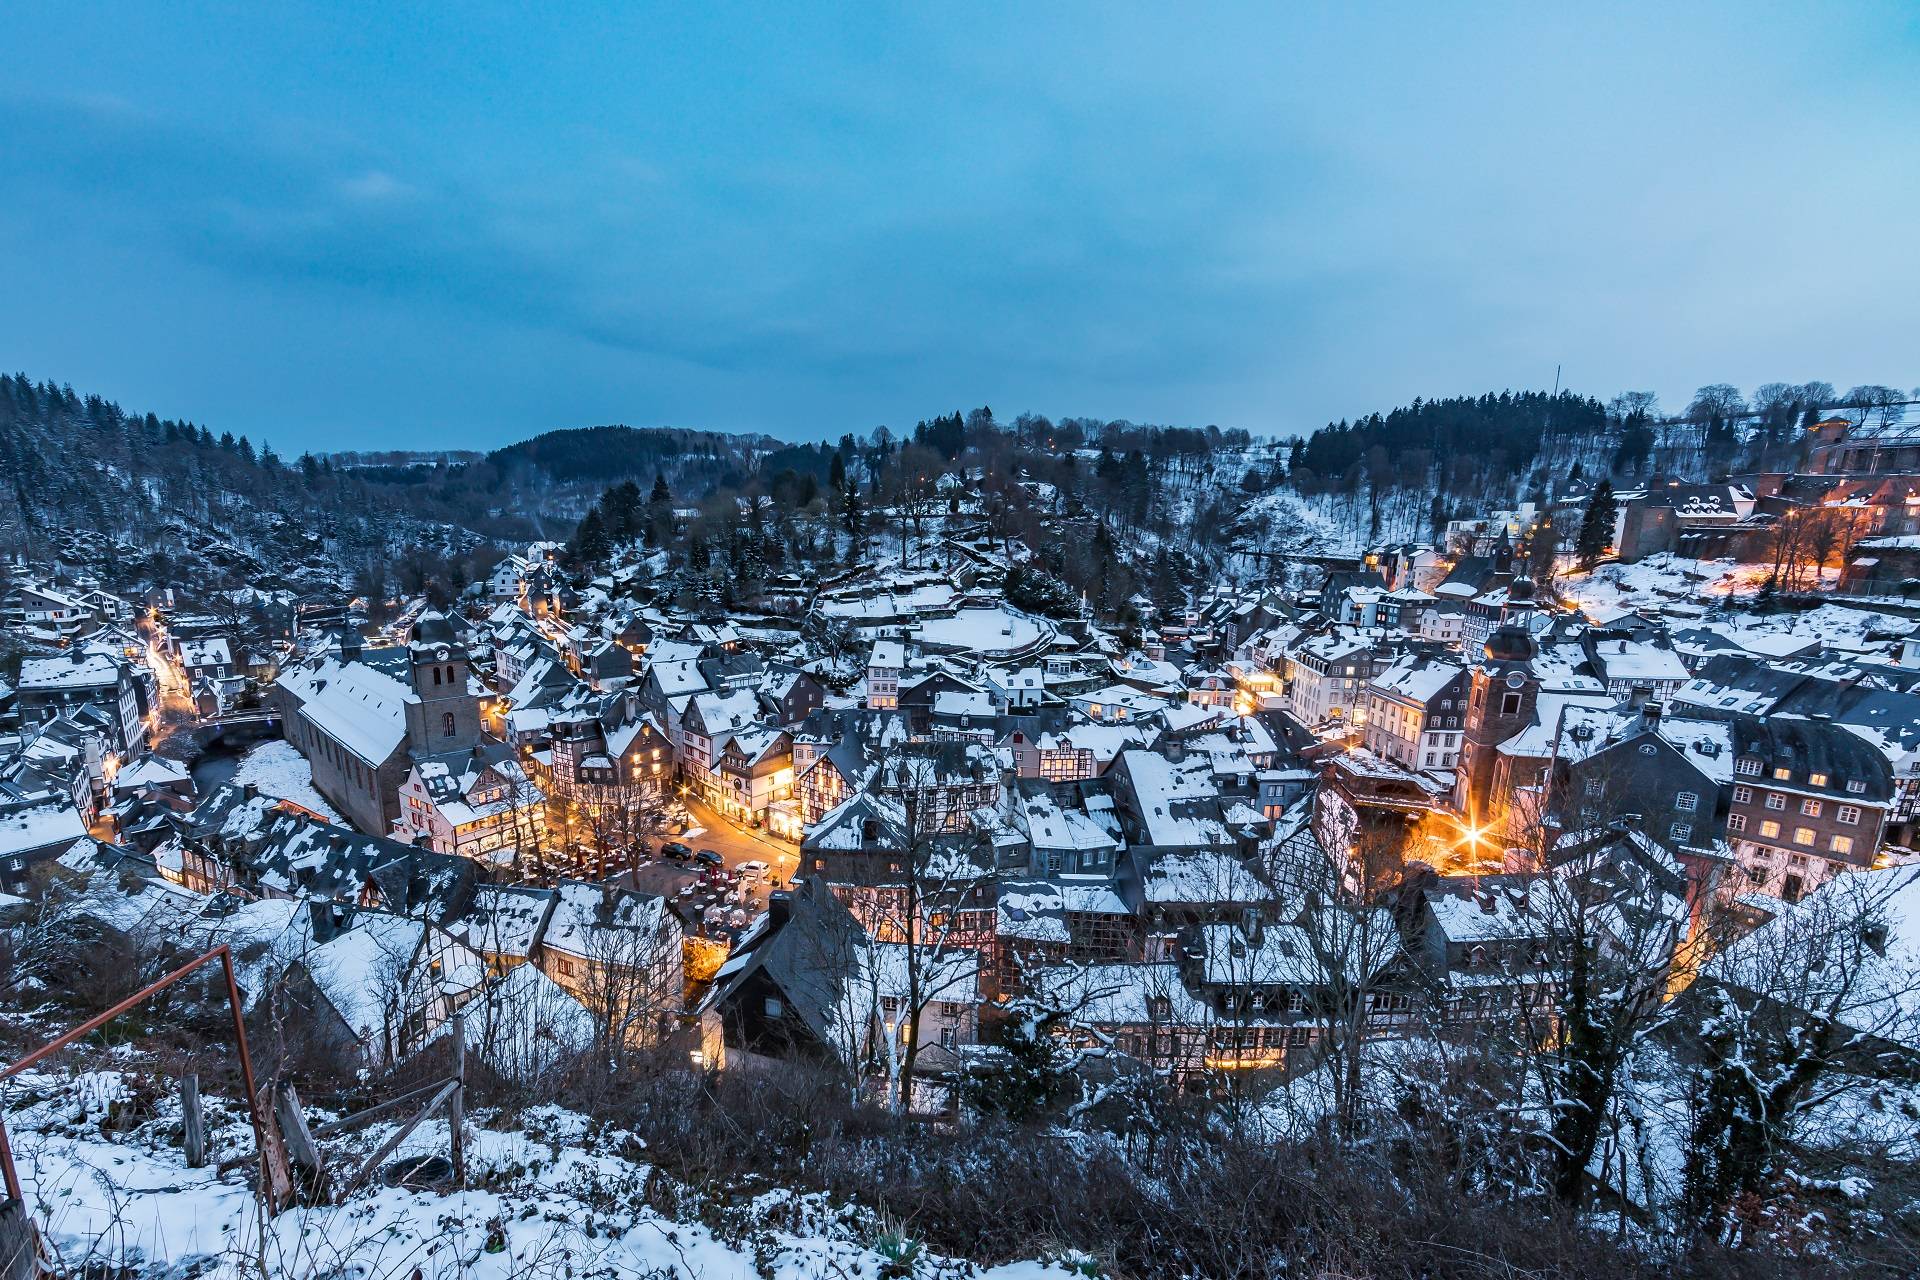 Winter photography mission to Monchau Germany! 